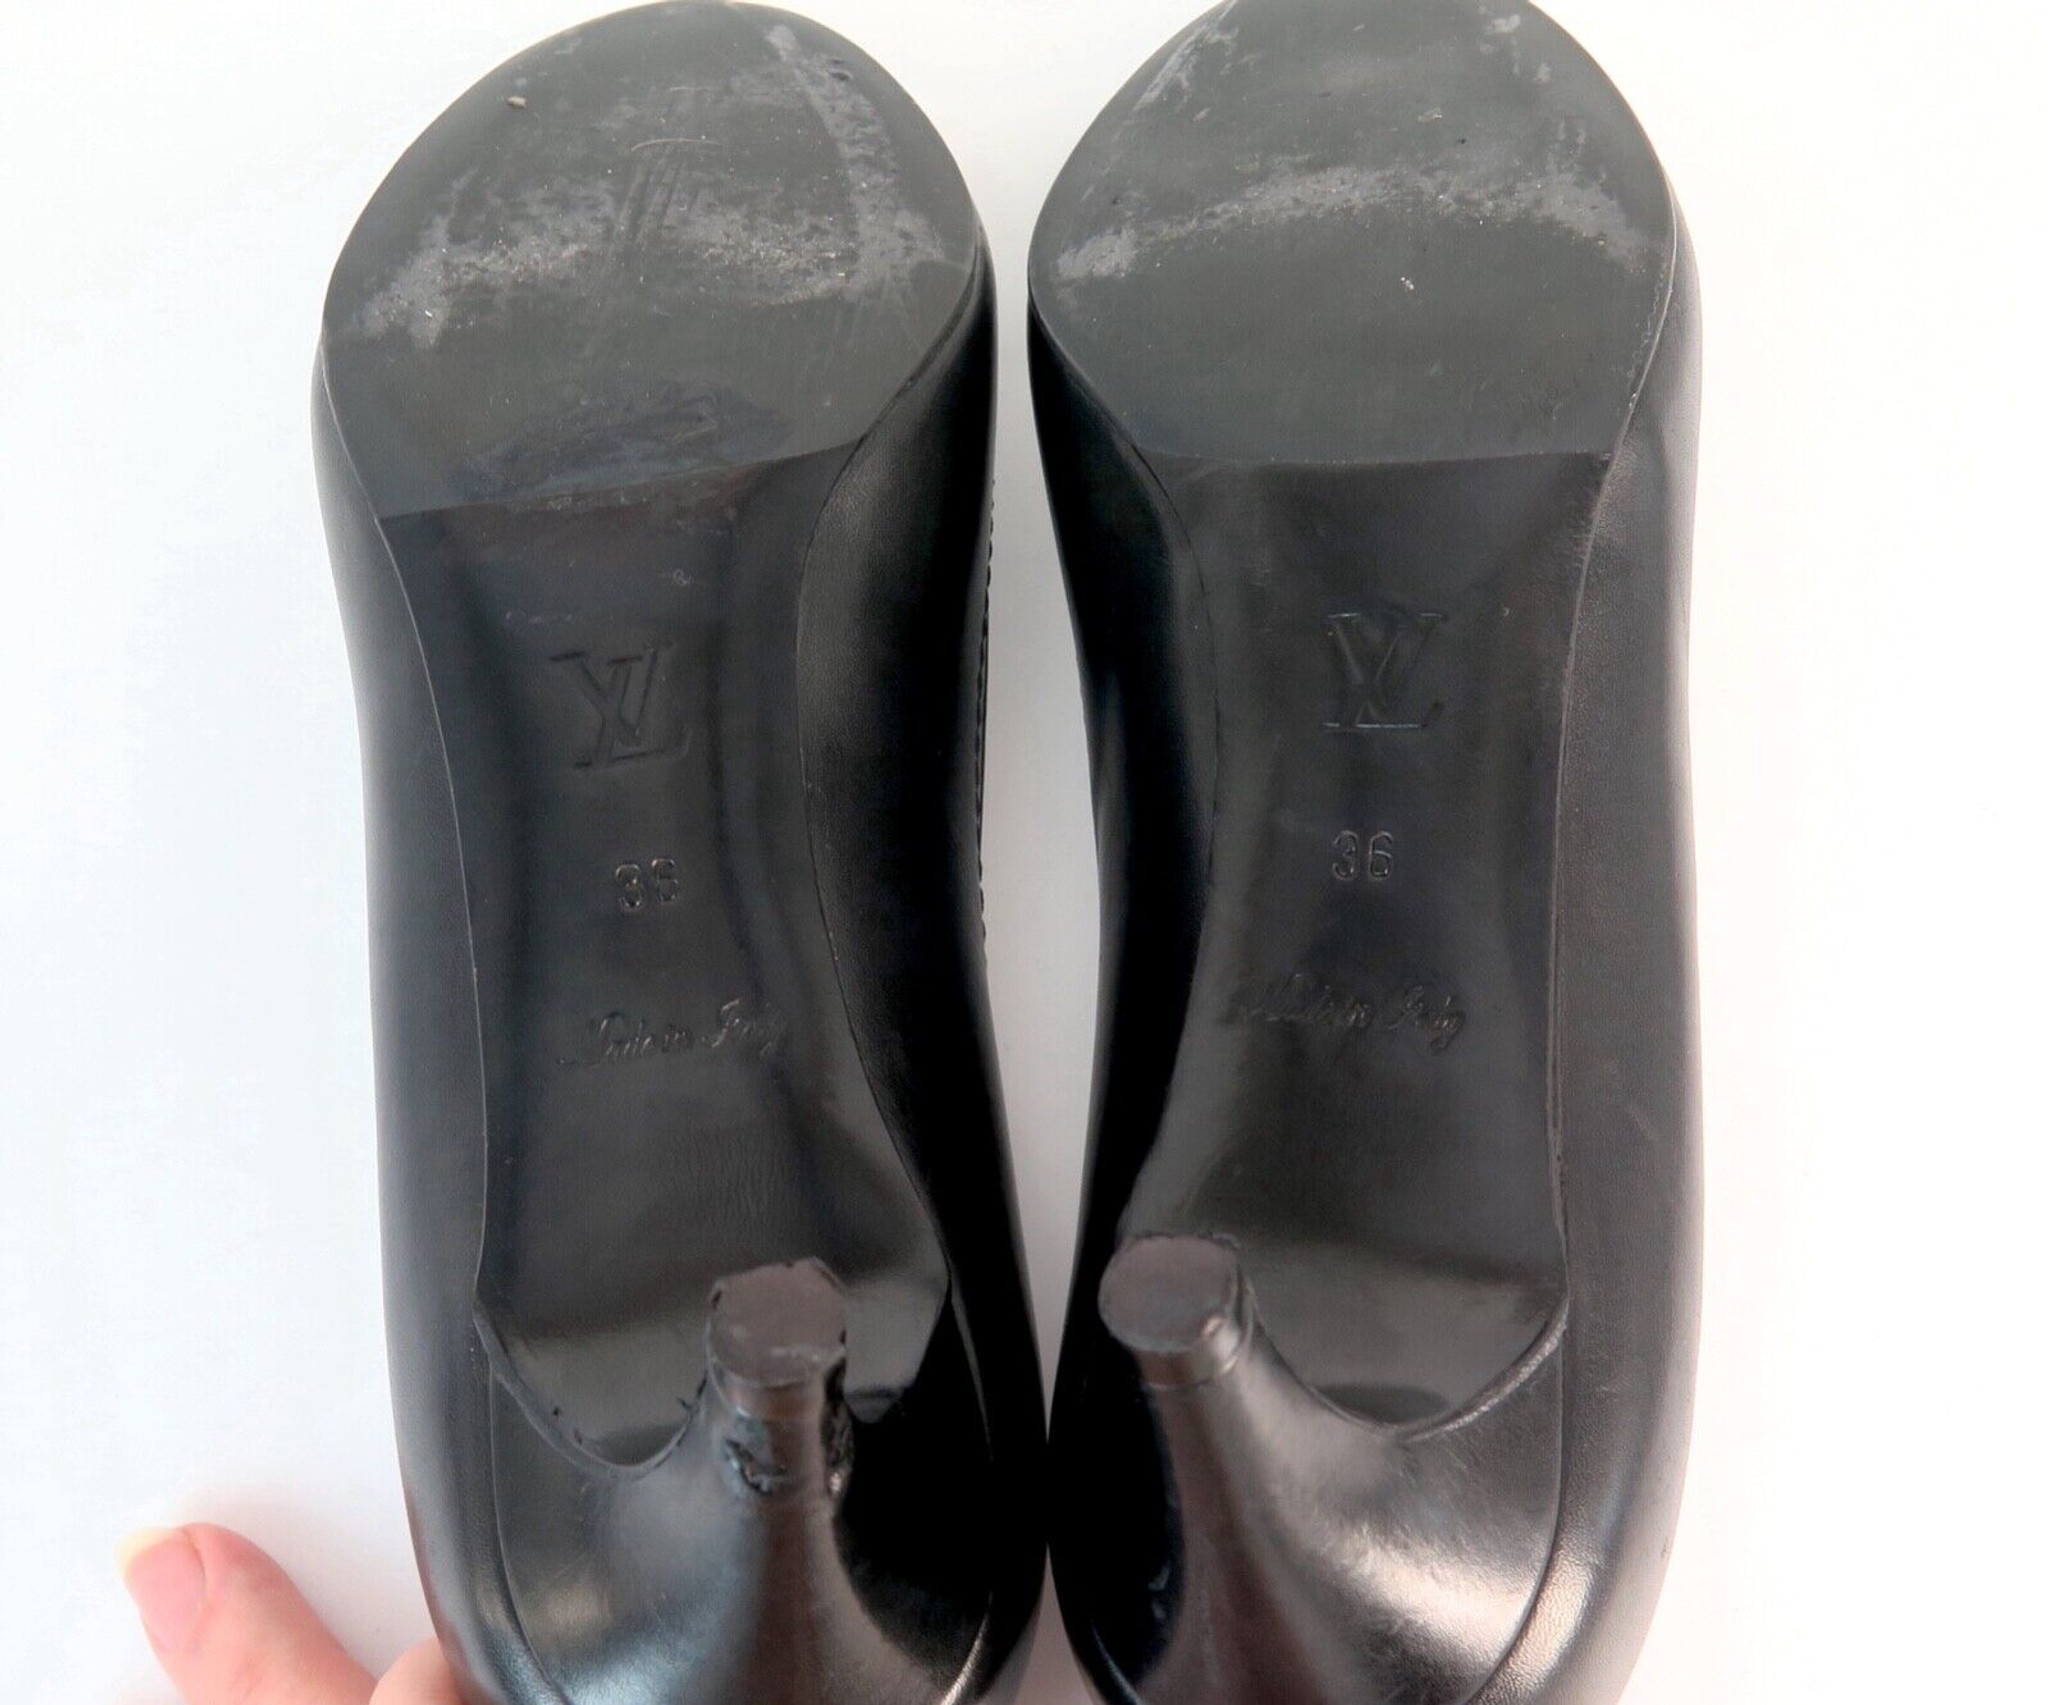 Louis Vuitton Black 'Love Story' Kitten Heel Shoes with Bow, size 36.